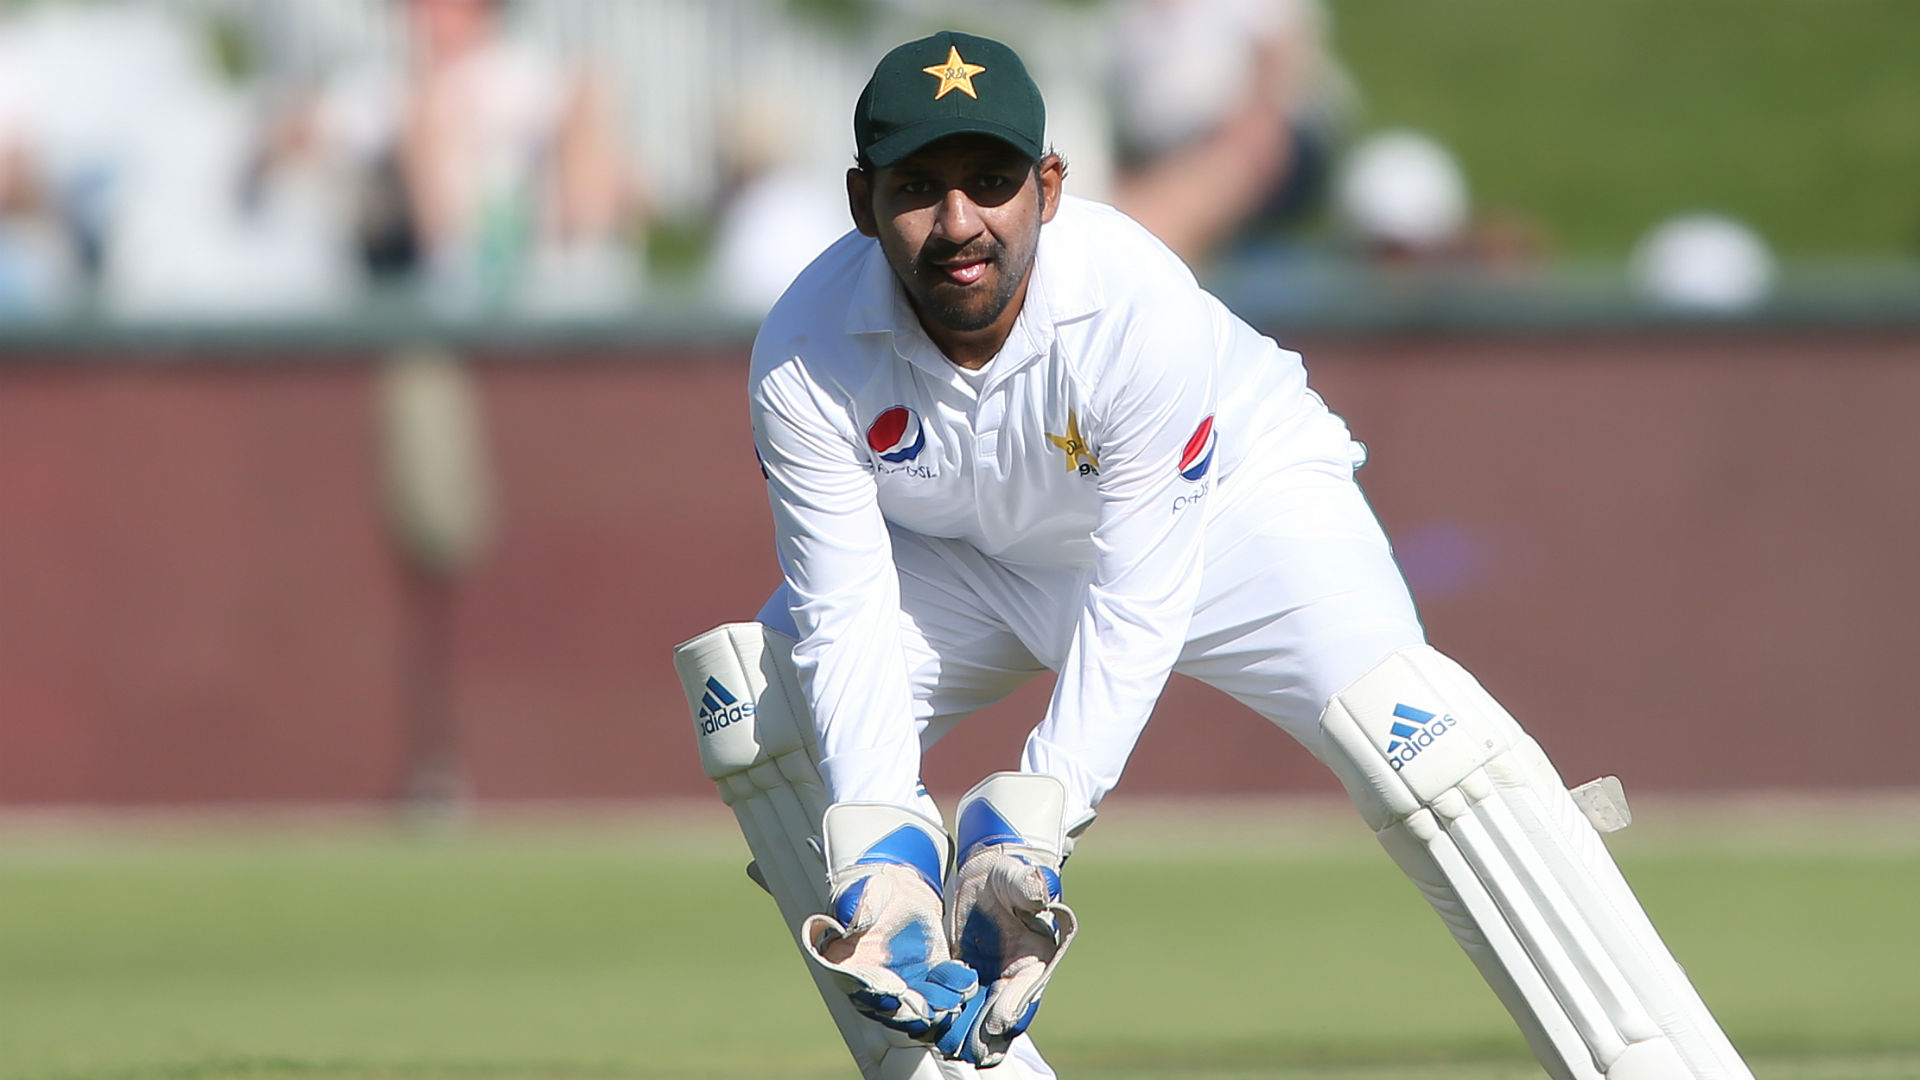 Despite their recent struggles in the Test format, Pakistan captain Sarfraz Ahmed has received the backing of coach Mickey Arthur.